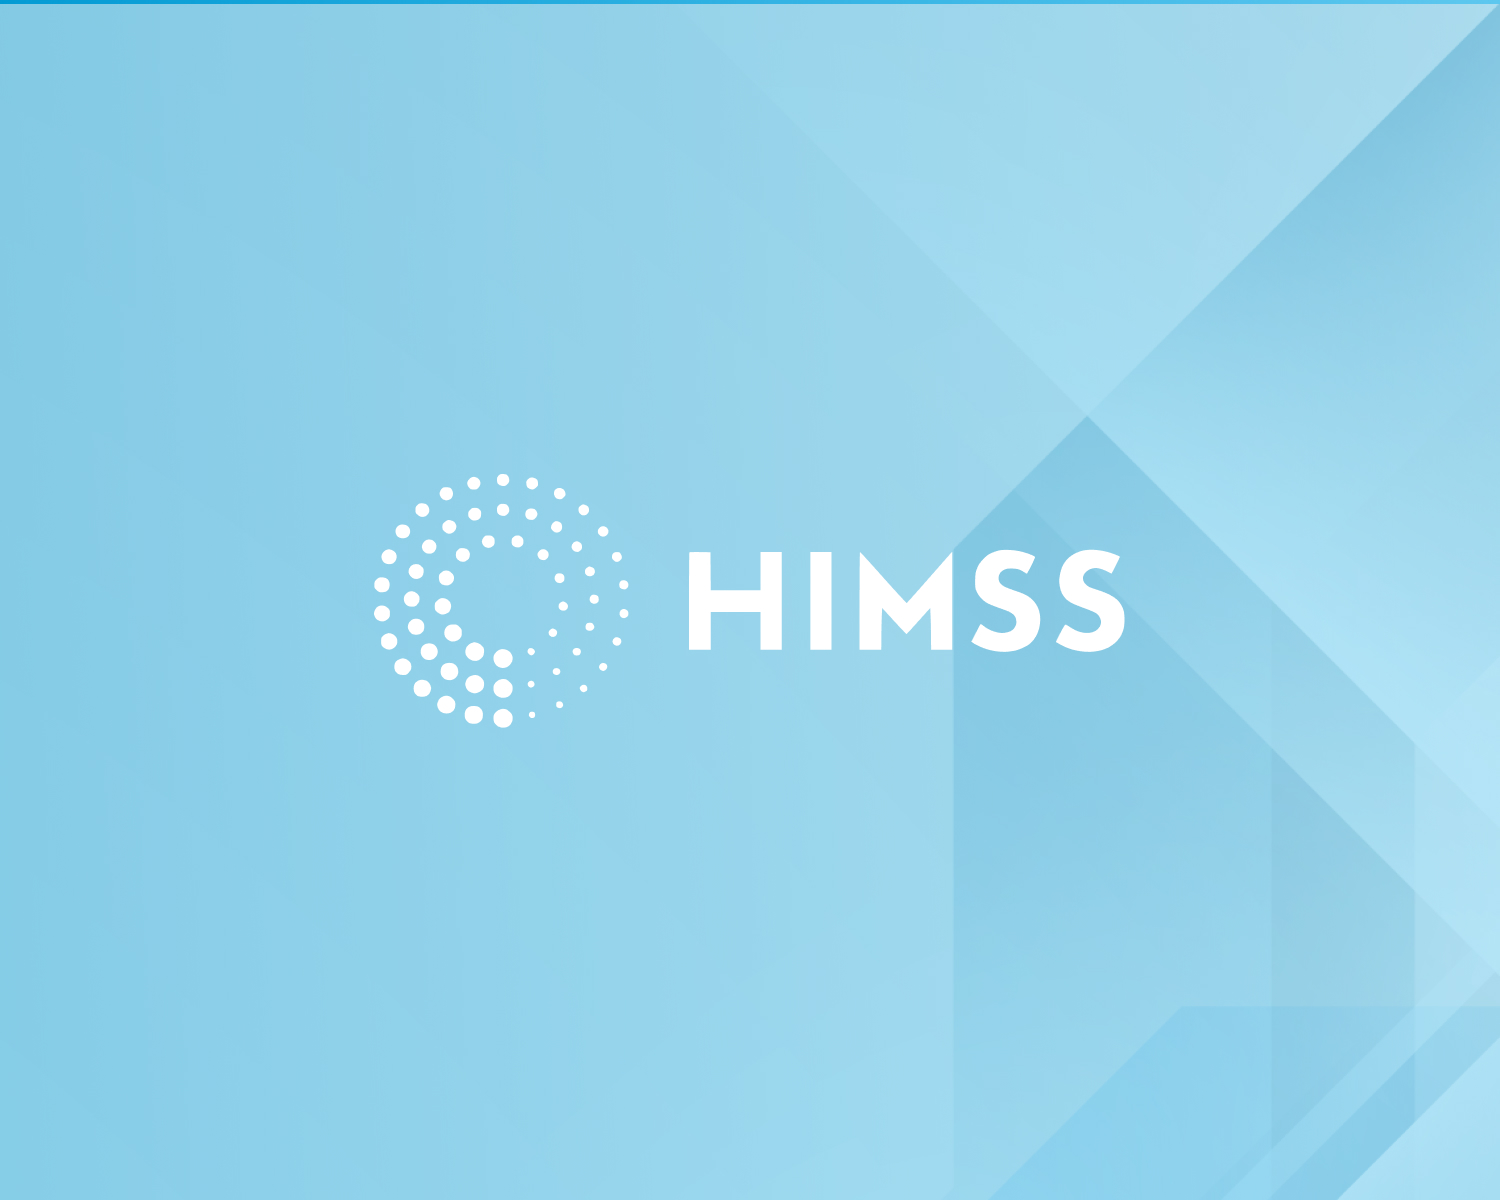 NIX to Exhibit at HIMSS Global Health Conference 2023